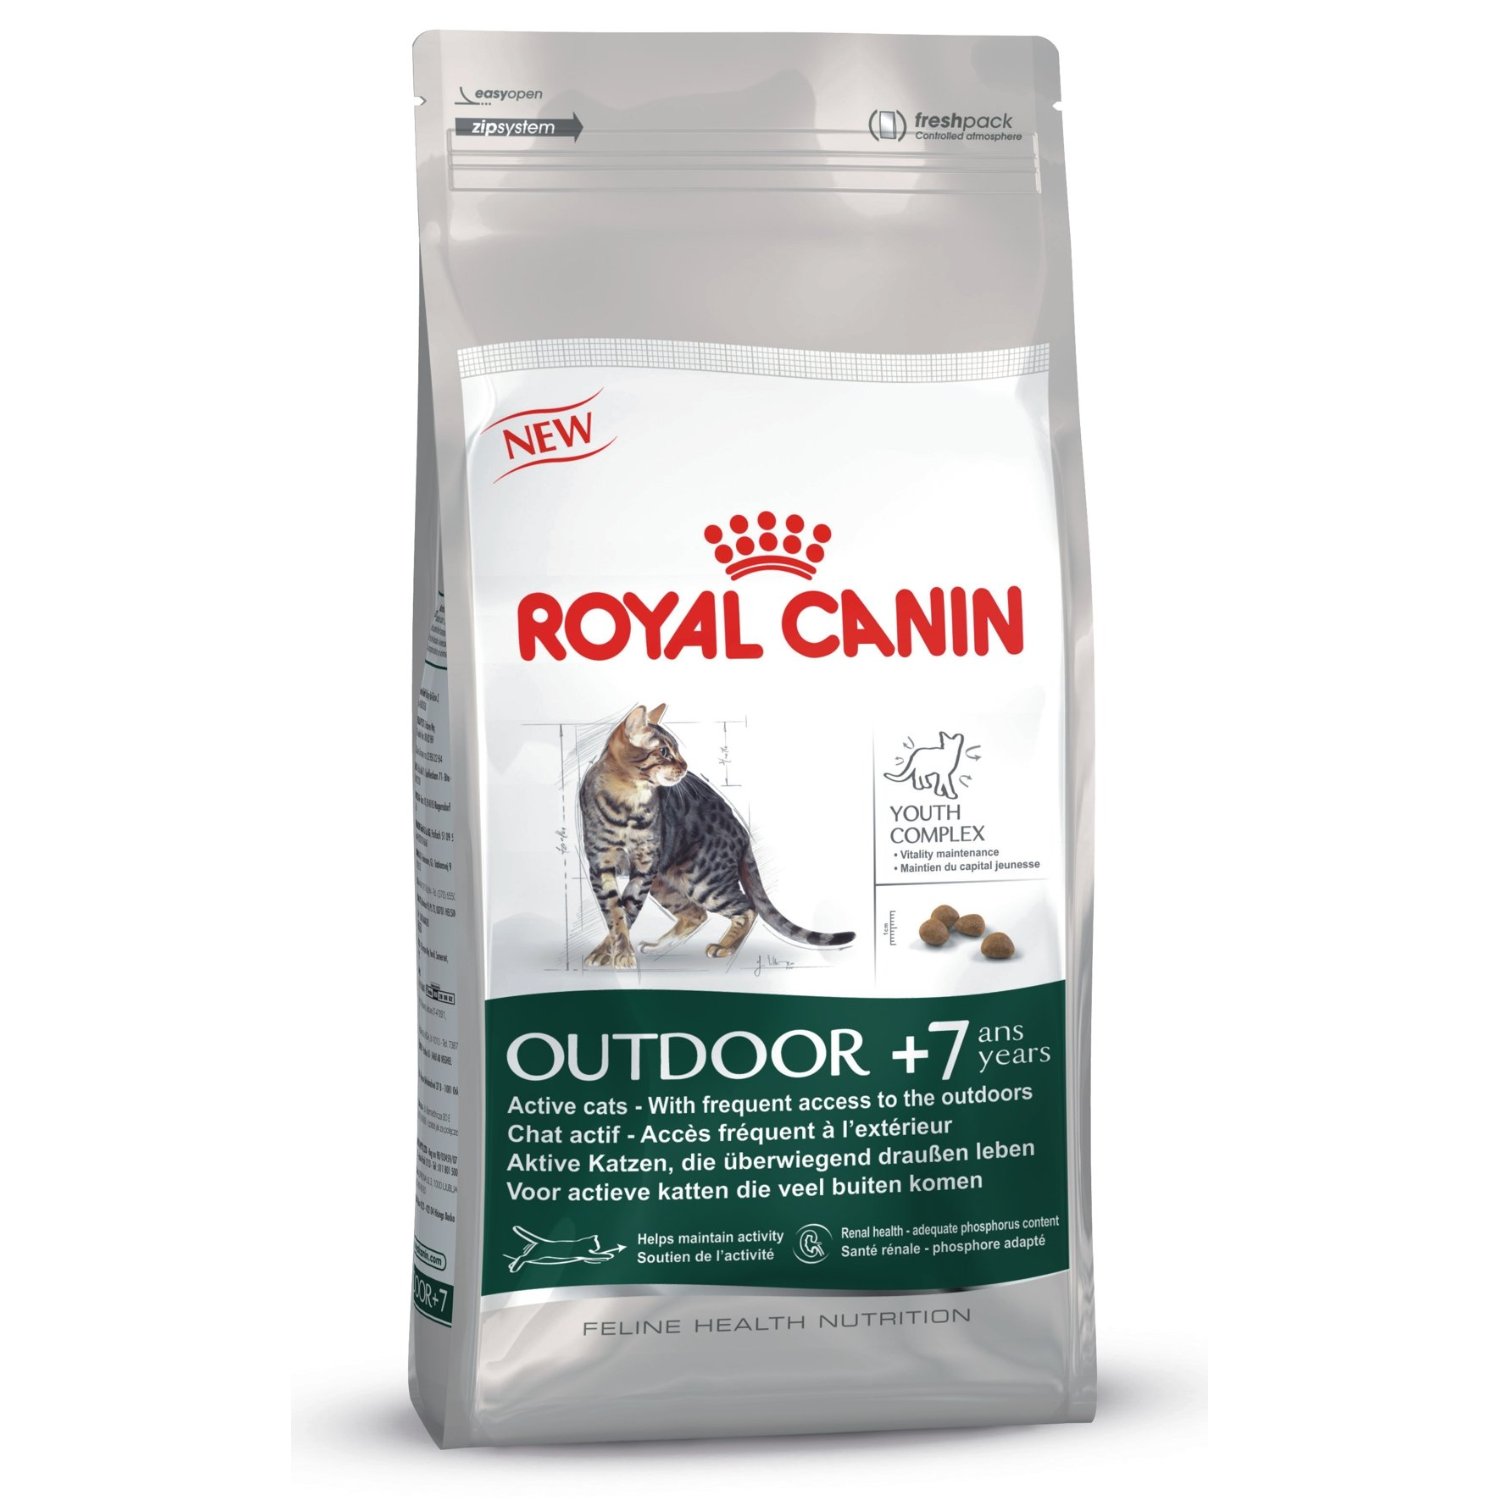 Royal Canin Outdoor +7 Cat Food